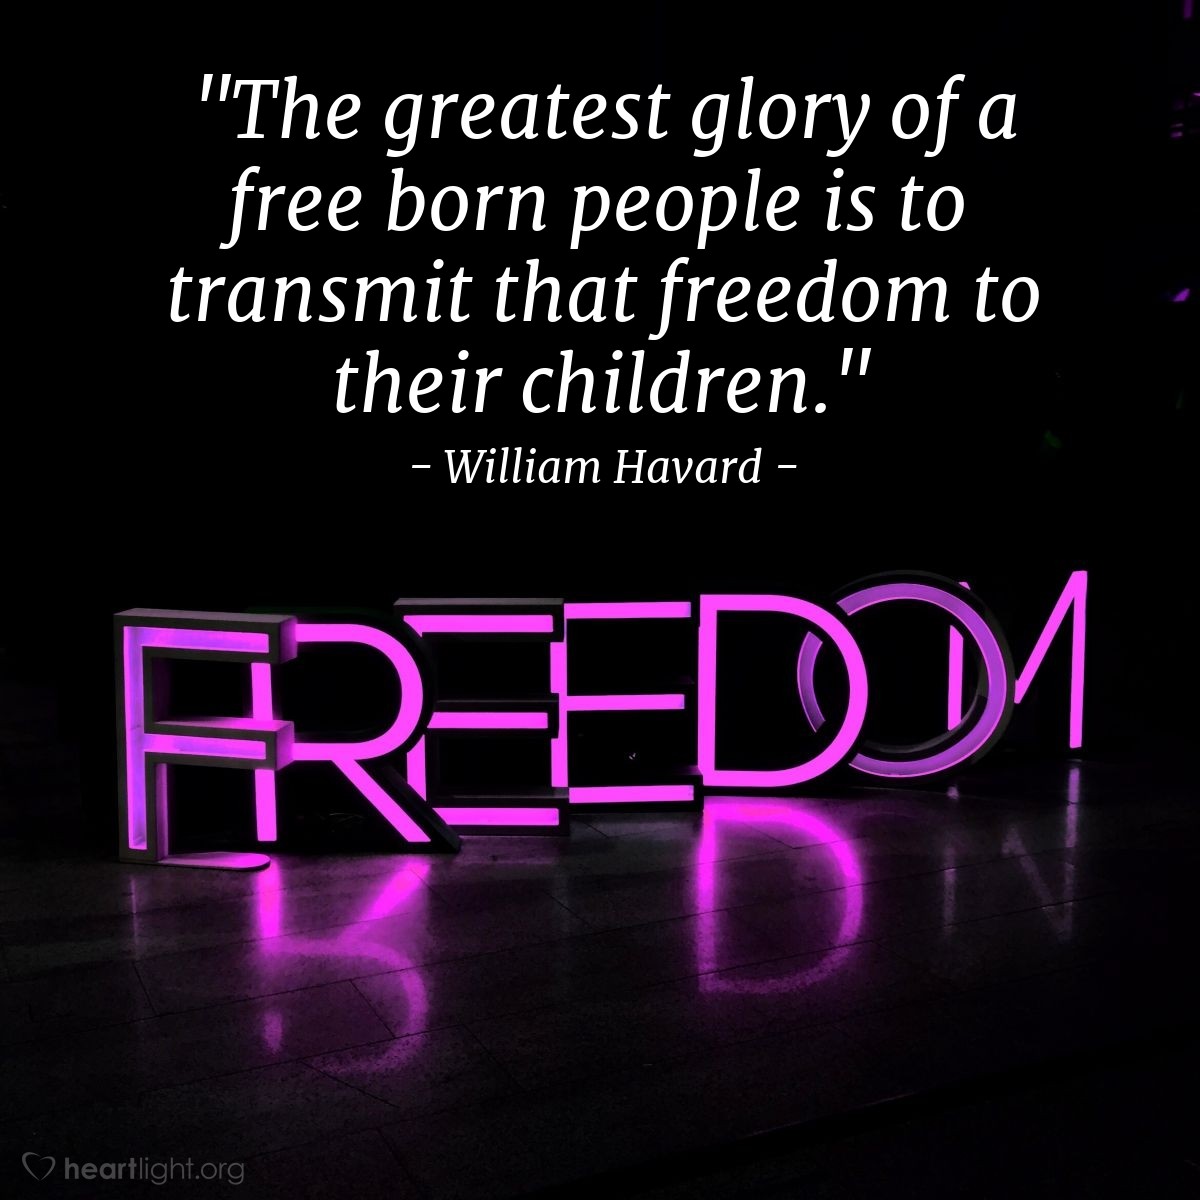 Illustration of William Havard — "The greatest glory of a free born people is to transmit that freedom to their children."